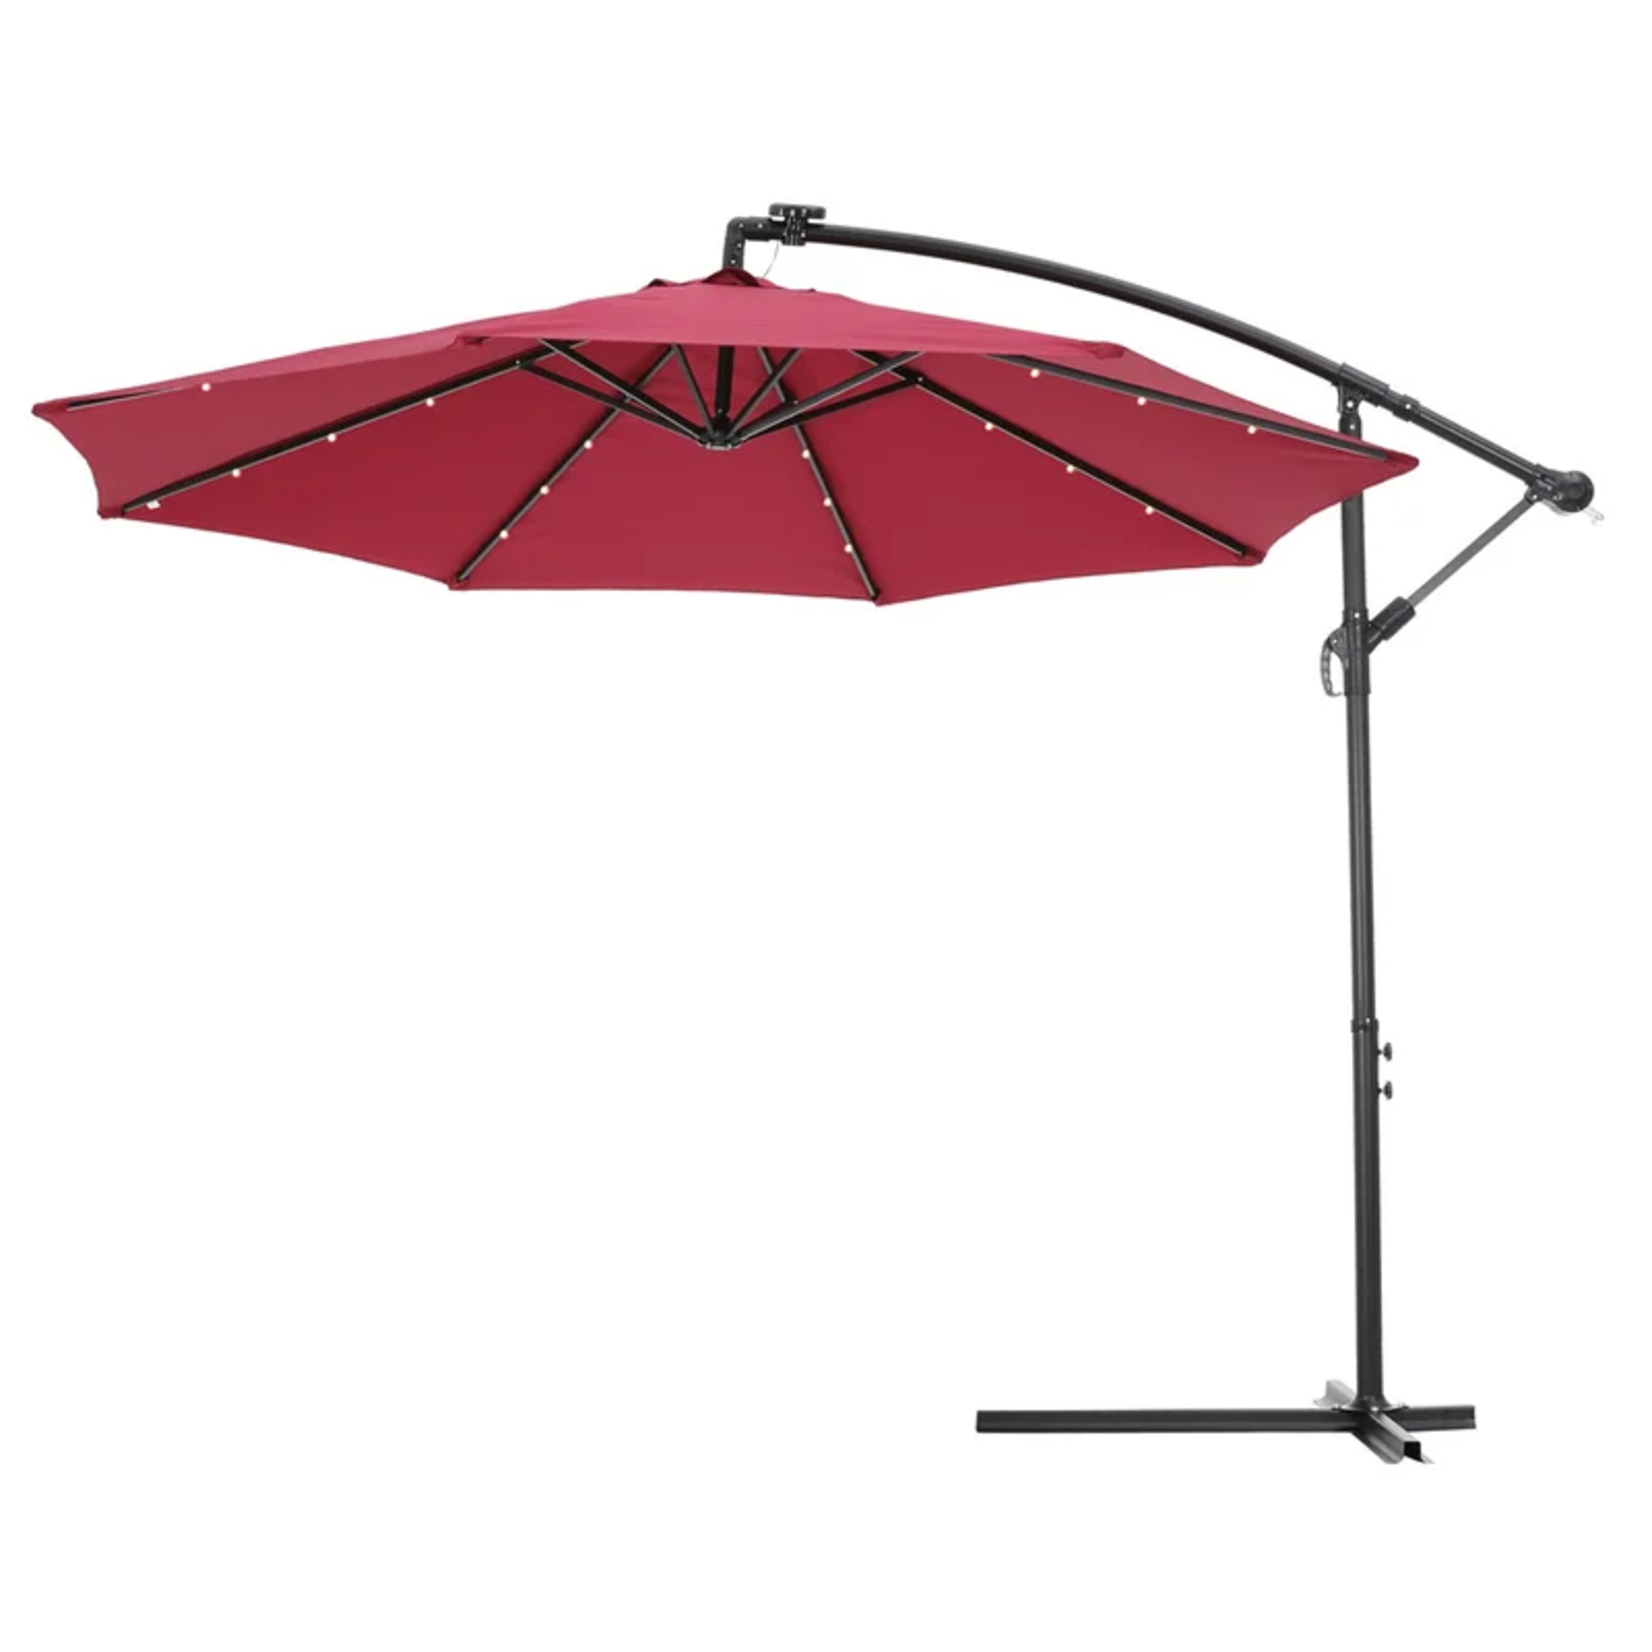 9.5' Lighted Cantilever Umbrella with X Base (Weights not Included)**